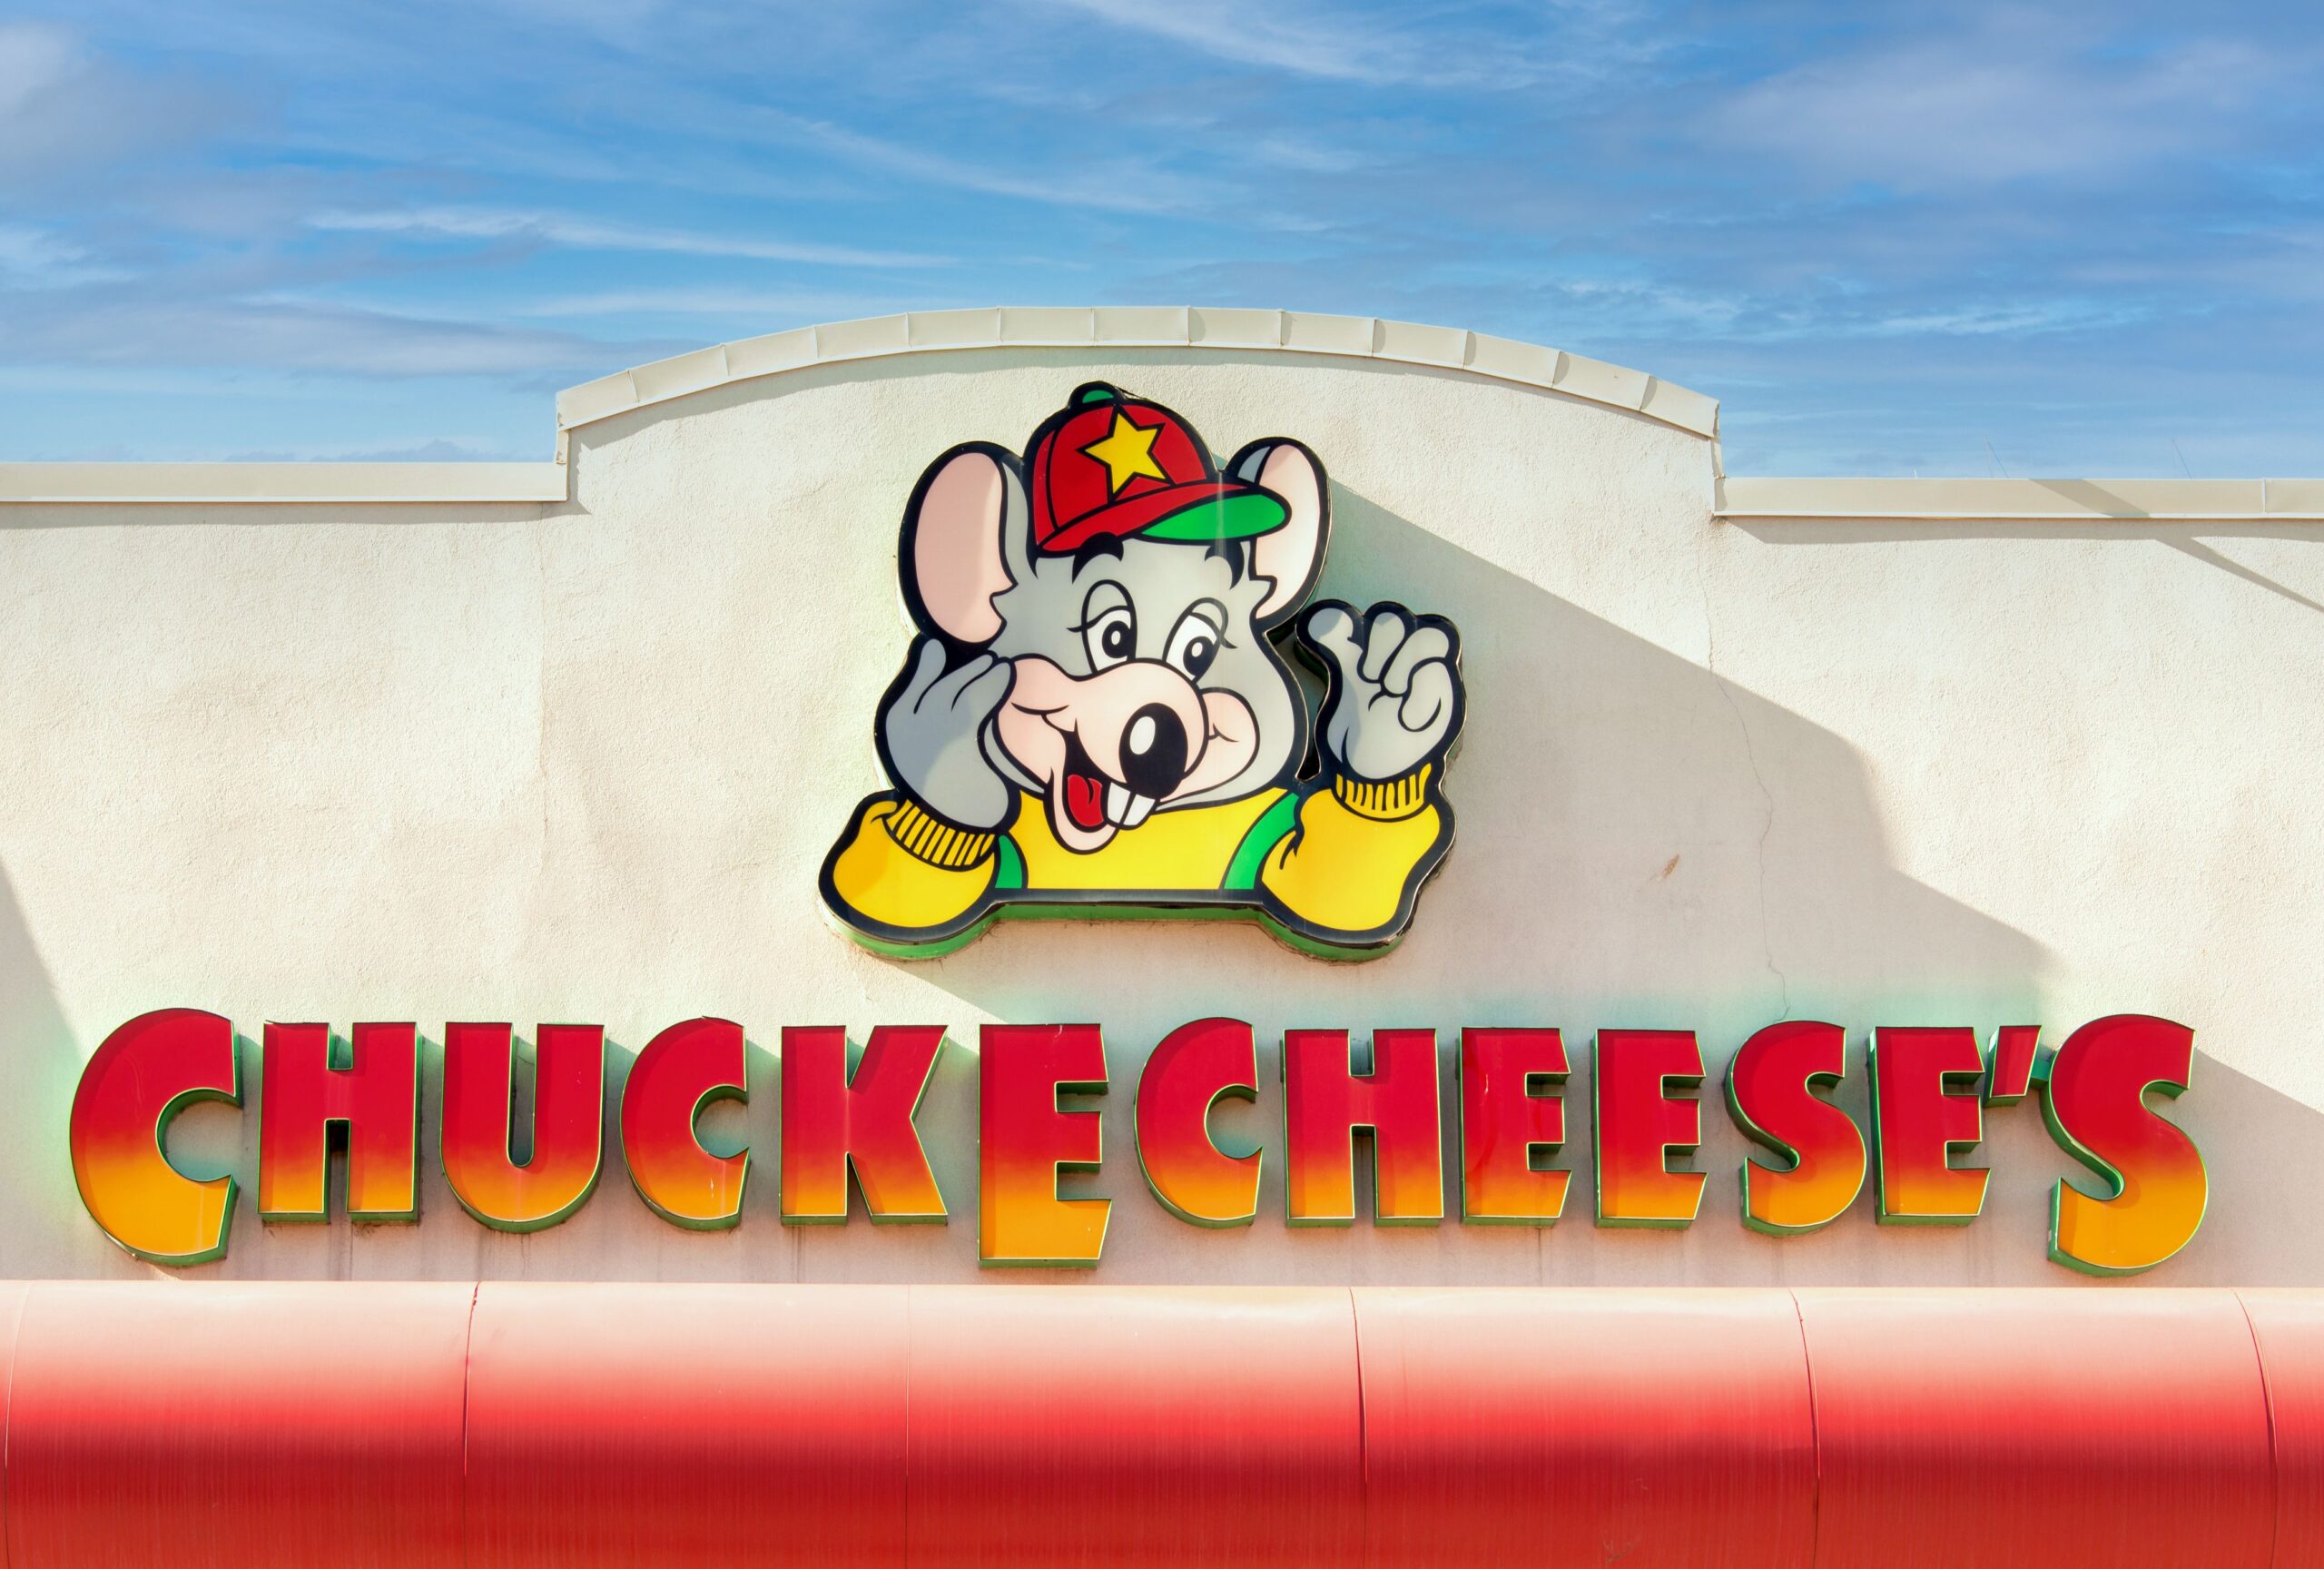 Entrance sign to a Chuck E. Cheese restaurant and entertainment business in Toronto, Canada.